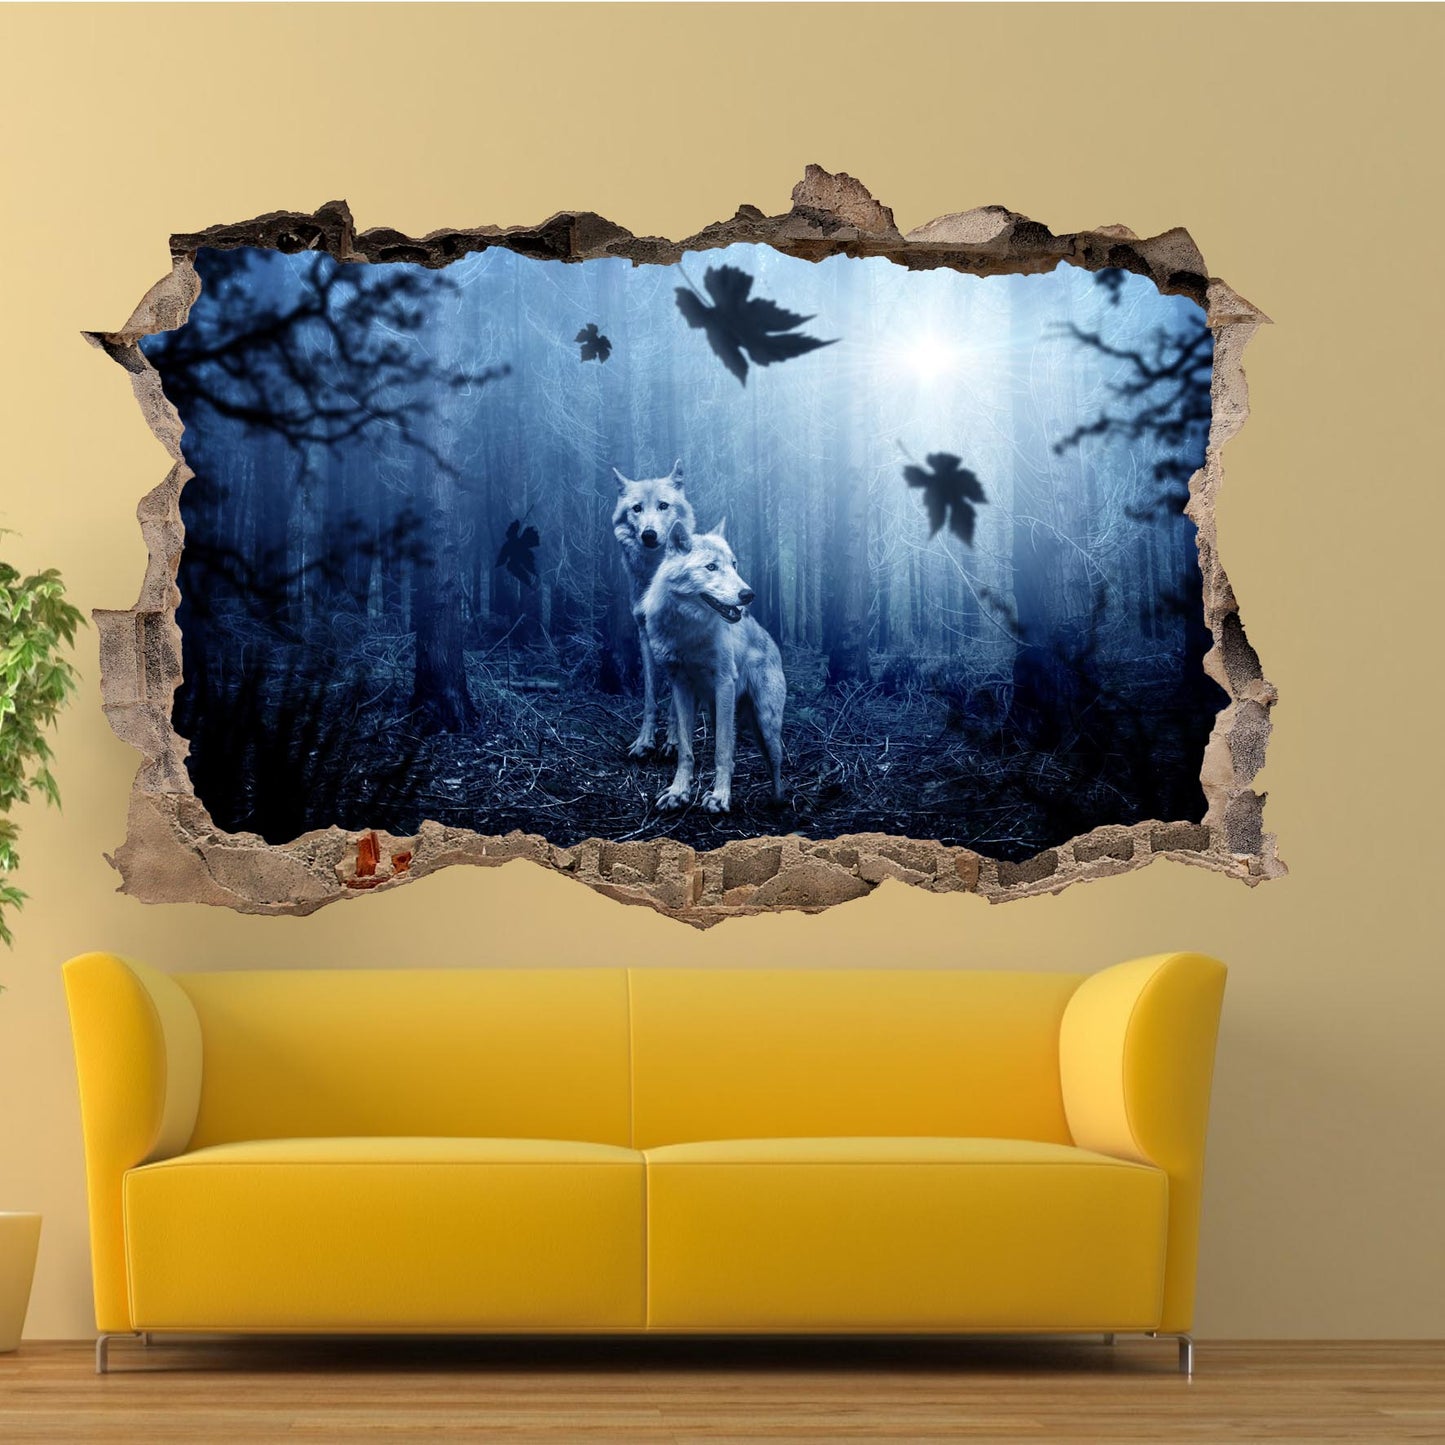 White Wolves Wall Sticker Mural Decal Poster